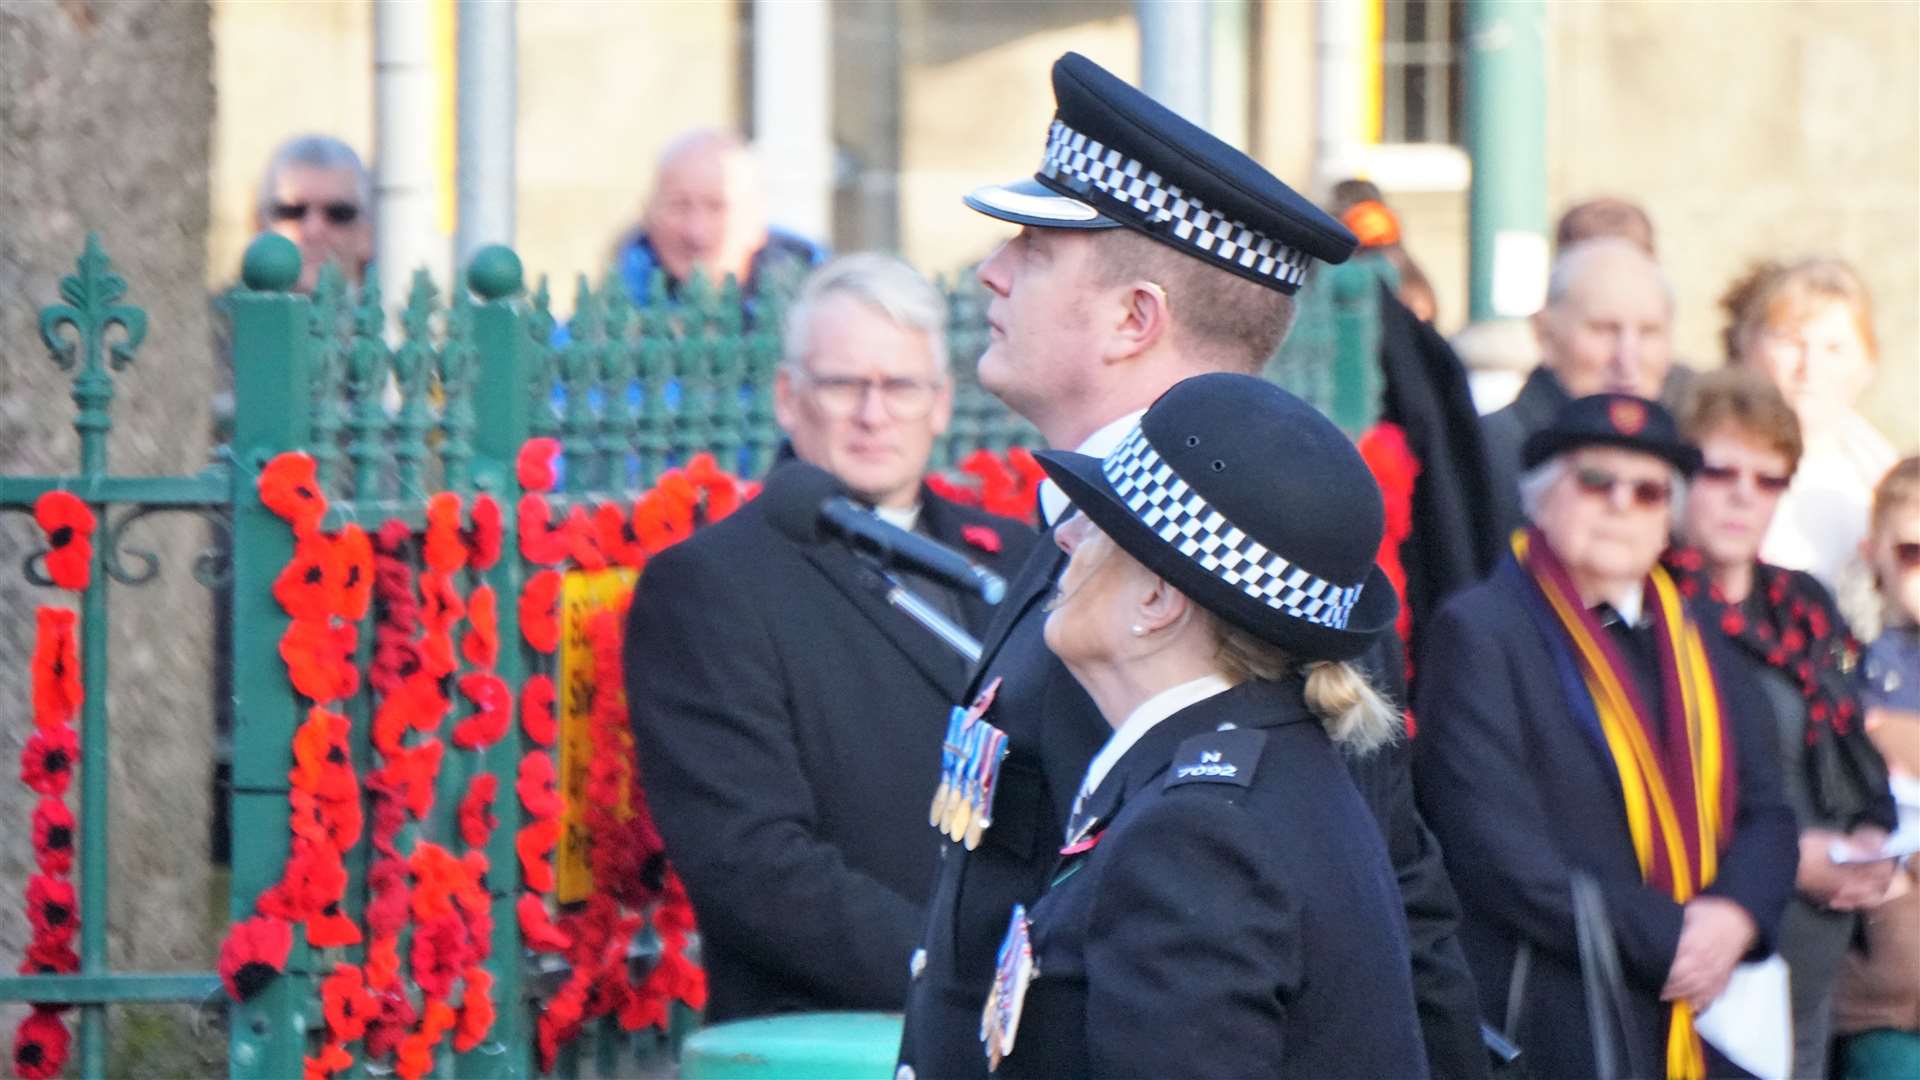 Special constable Thelma Mackenzie lays a wreath at Thurso War Memorial alongside Simon Johns, an officer from the Civil Nuclear Constabulary. Picture: DGS